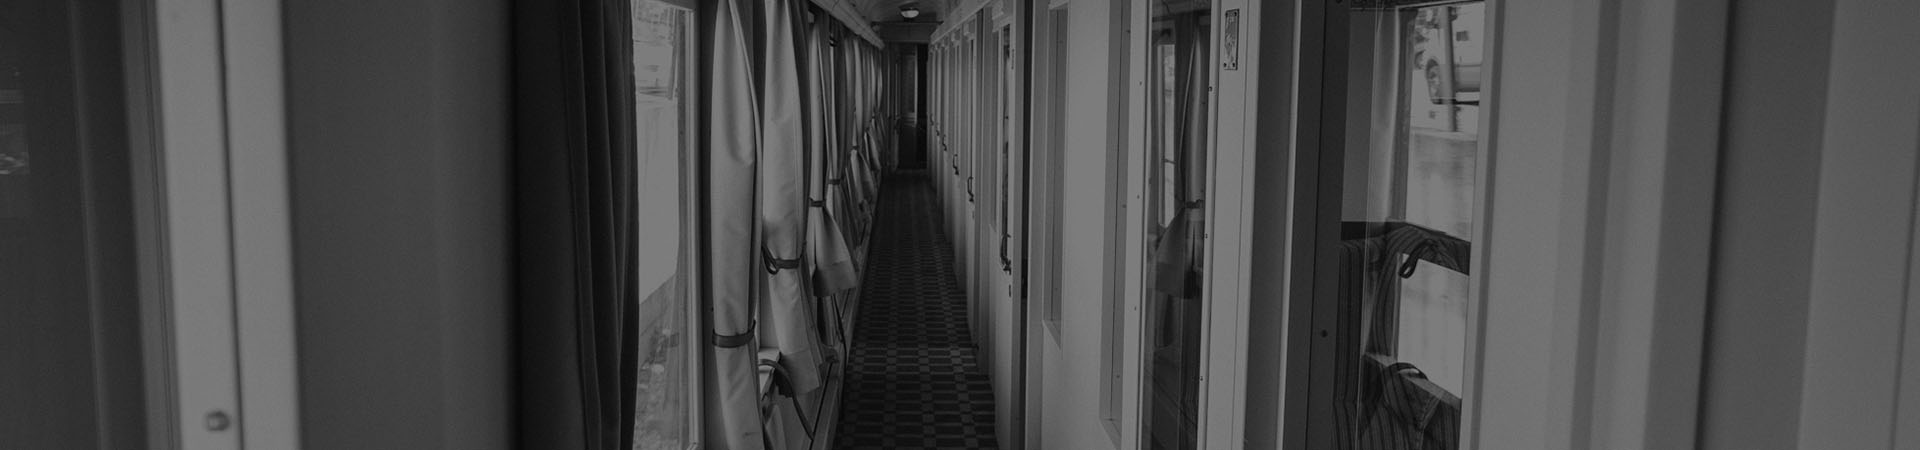 Photo of the interior of the Presidential Train Journalist’s Carriage